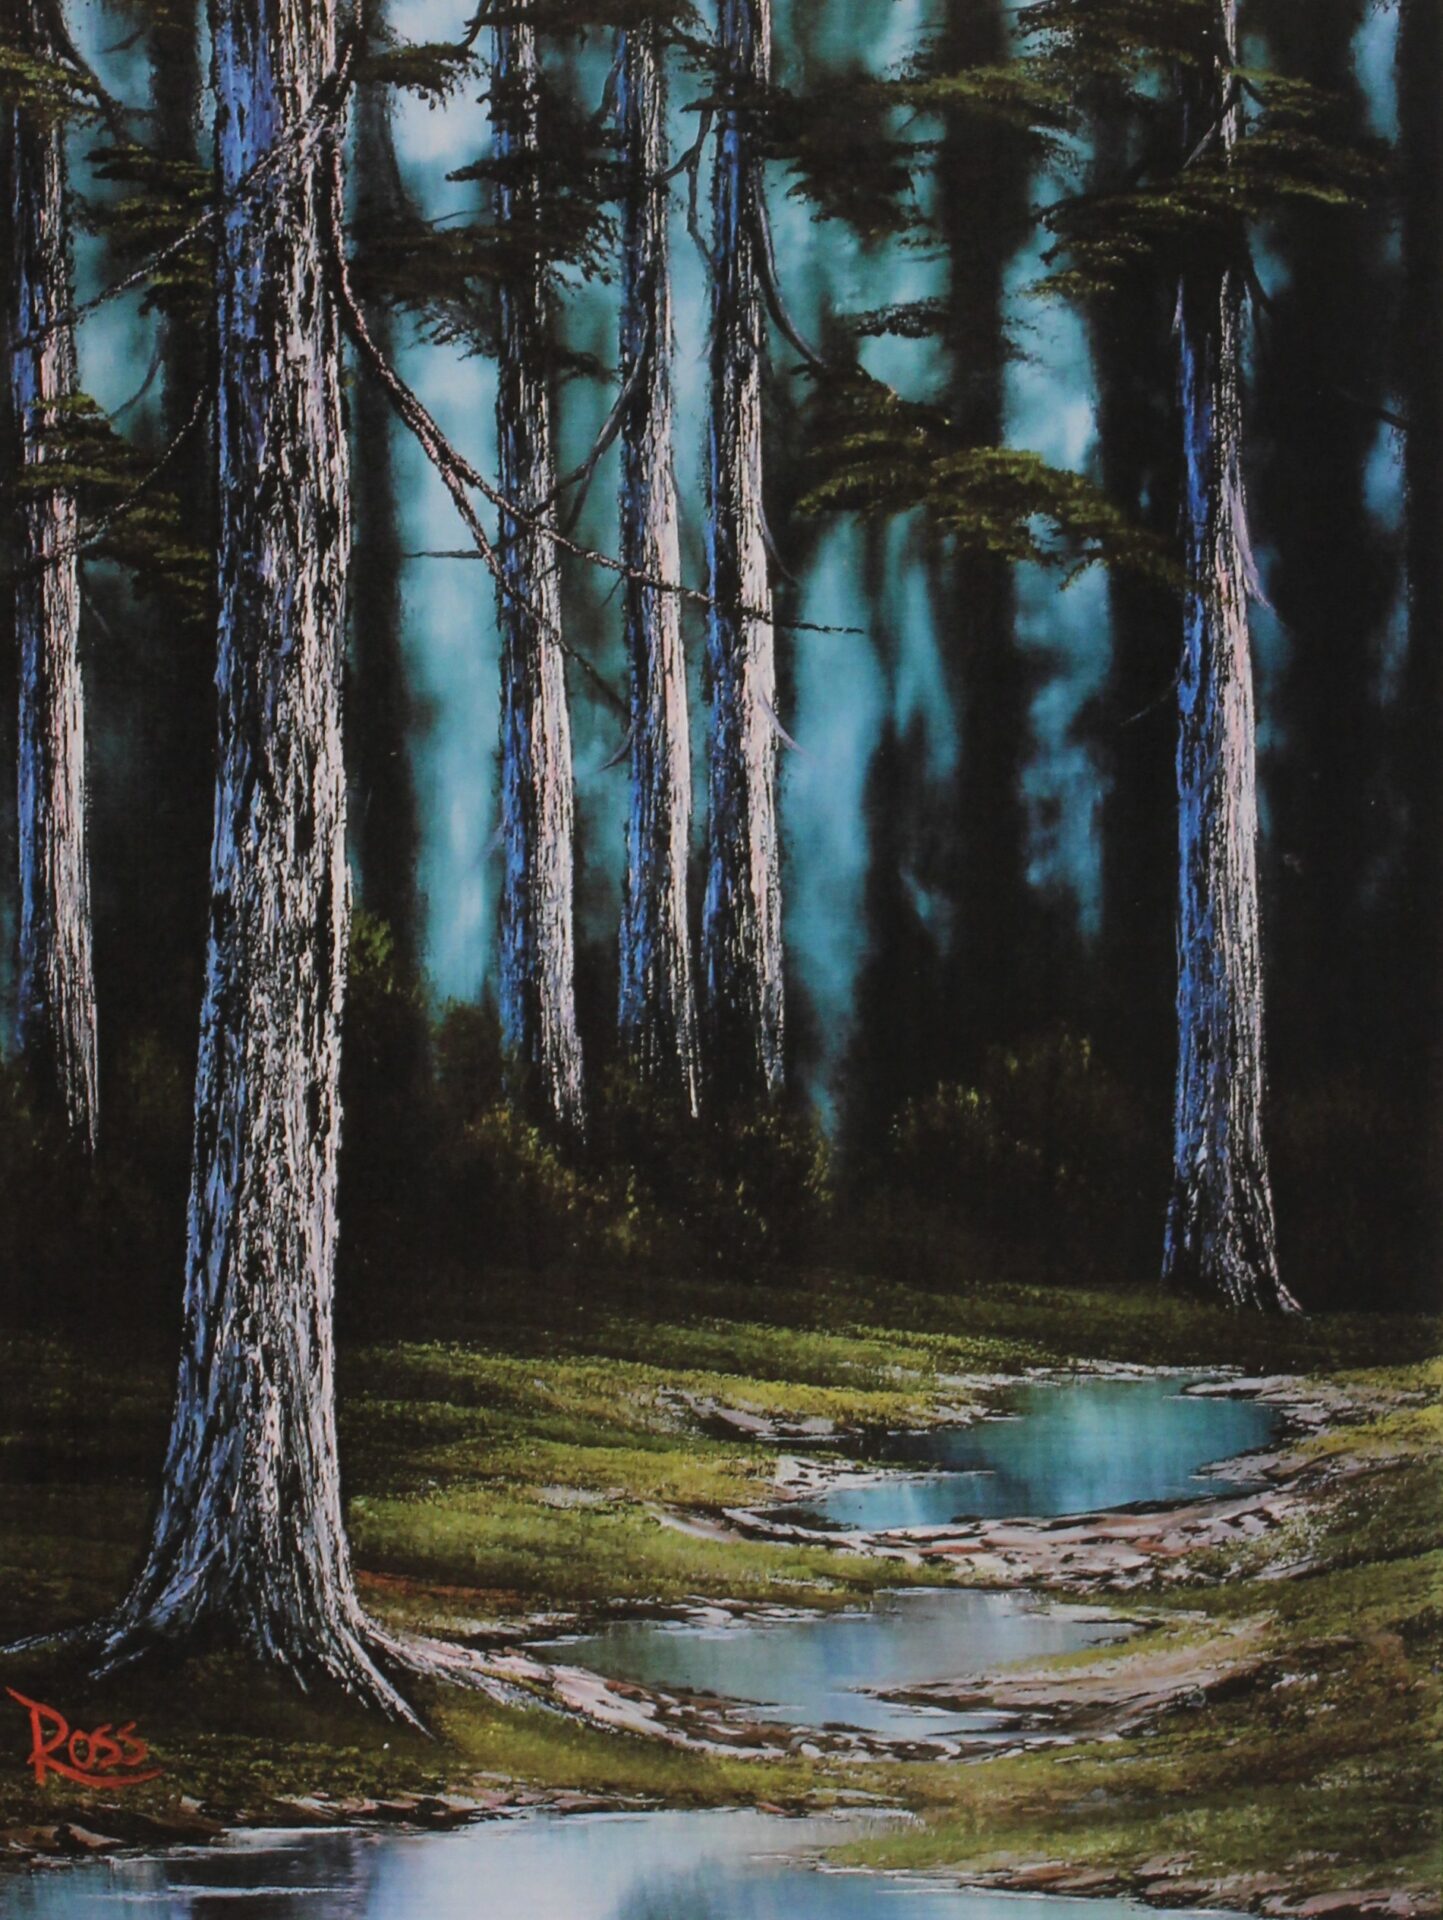 A painting of a dark, secluded forest